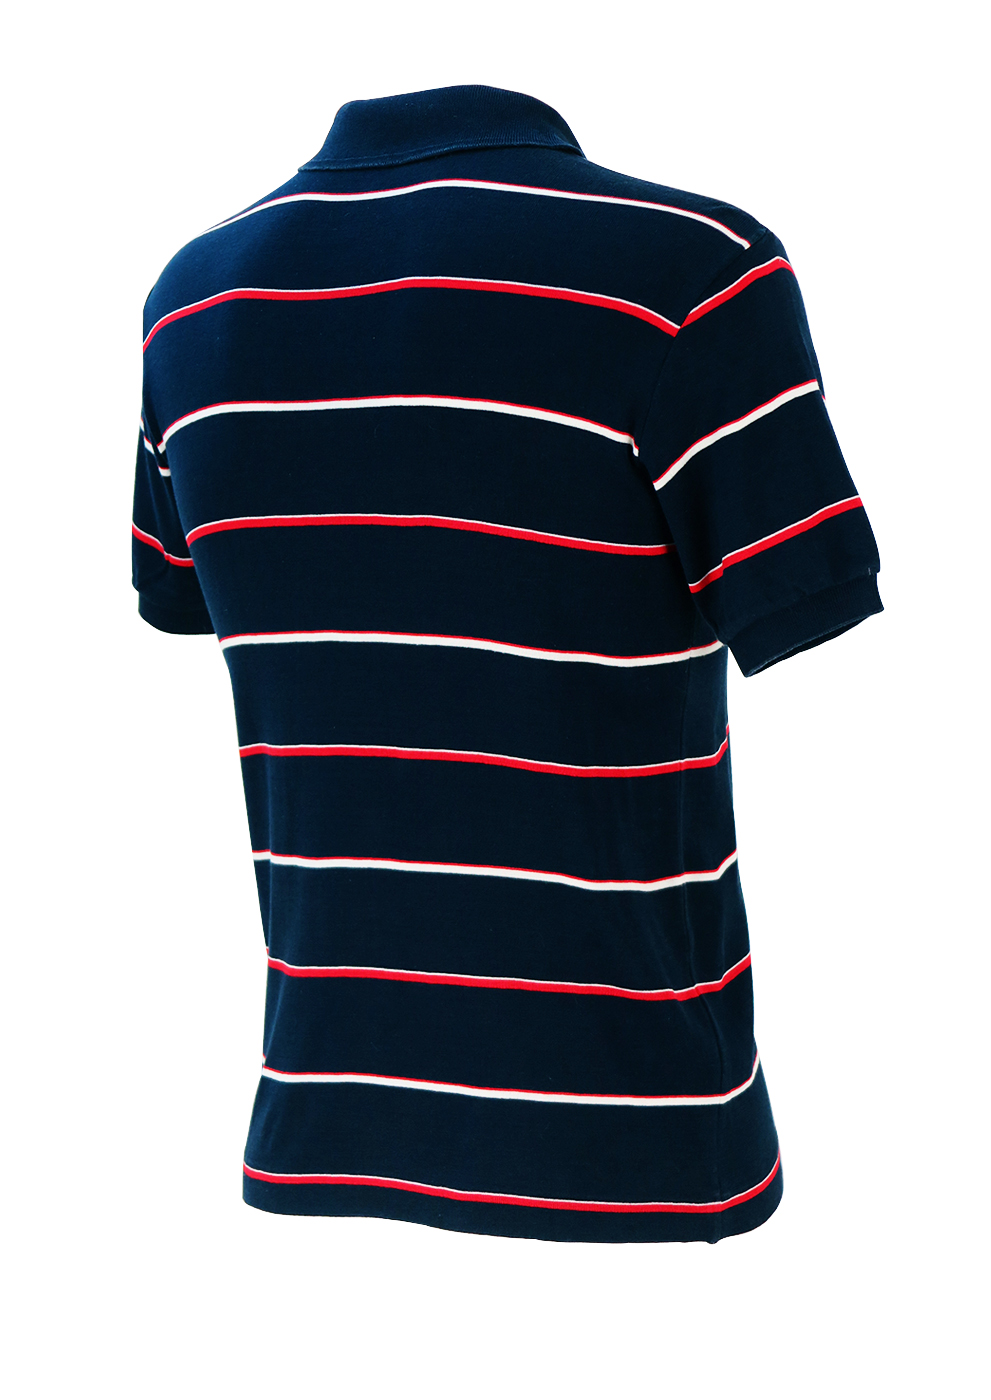 Fila Navy Blue Polo Shirt with Red & White Stripes - S | Reign Vintage